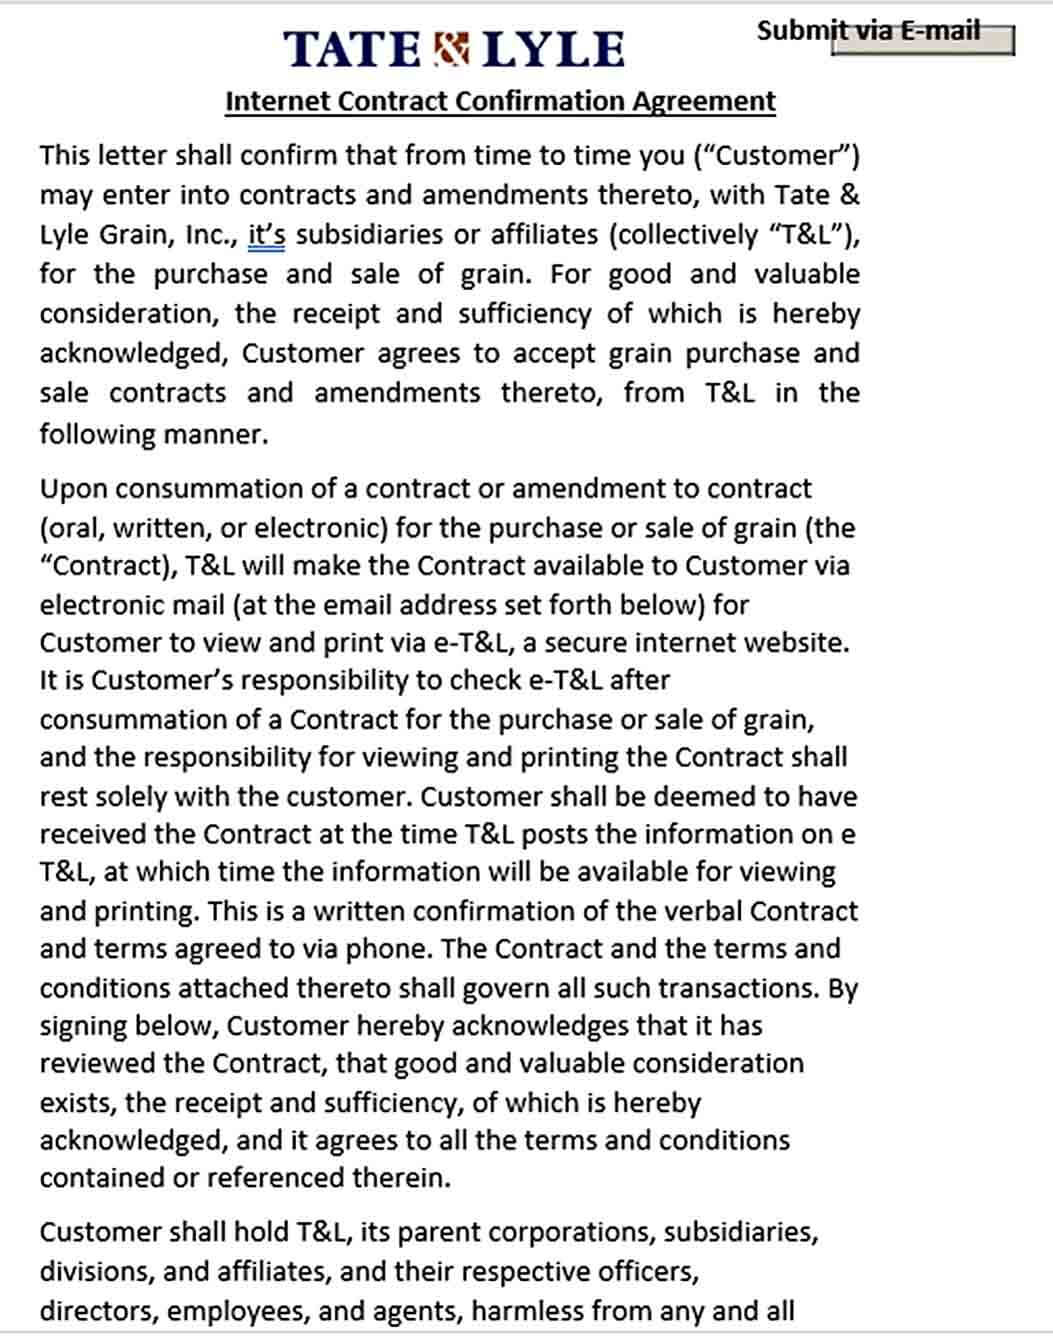 Sample Internet Contract Confirmation Agreement